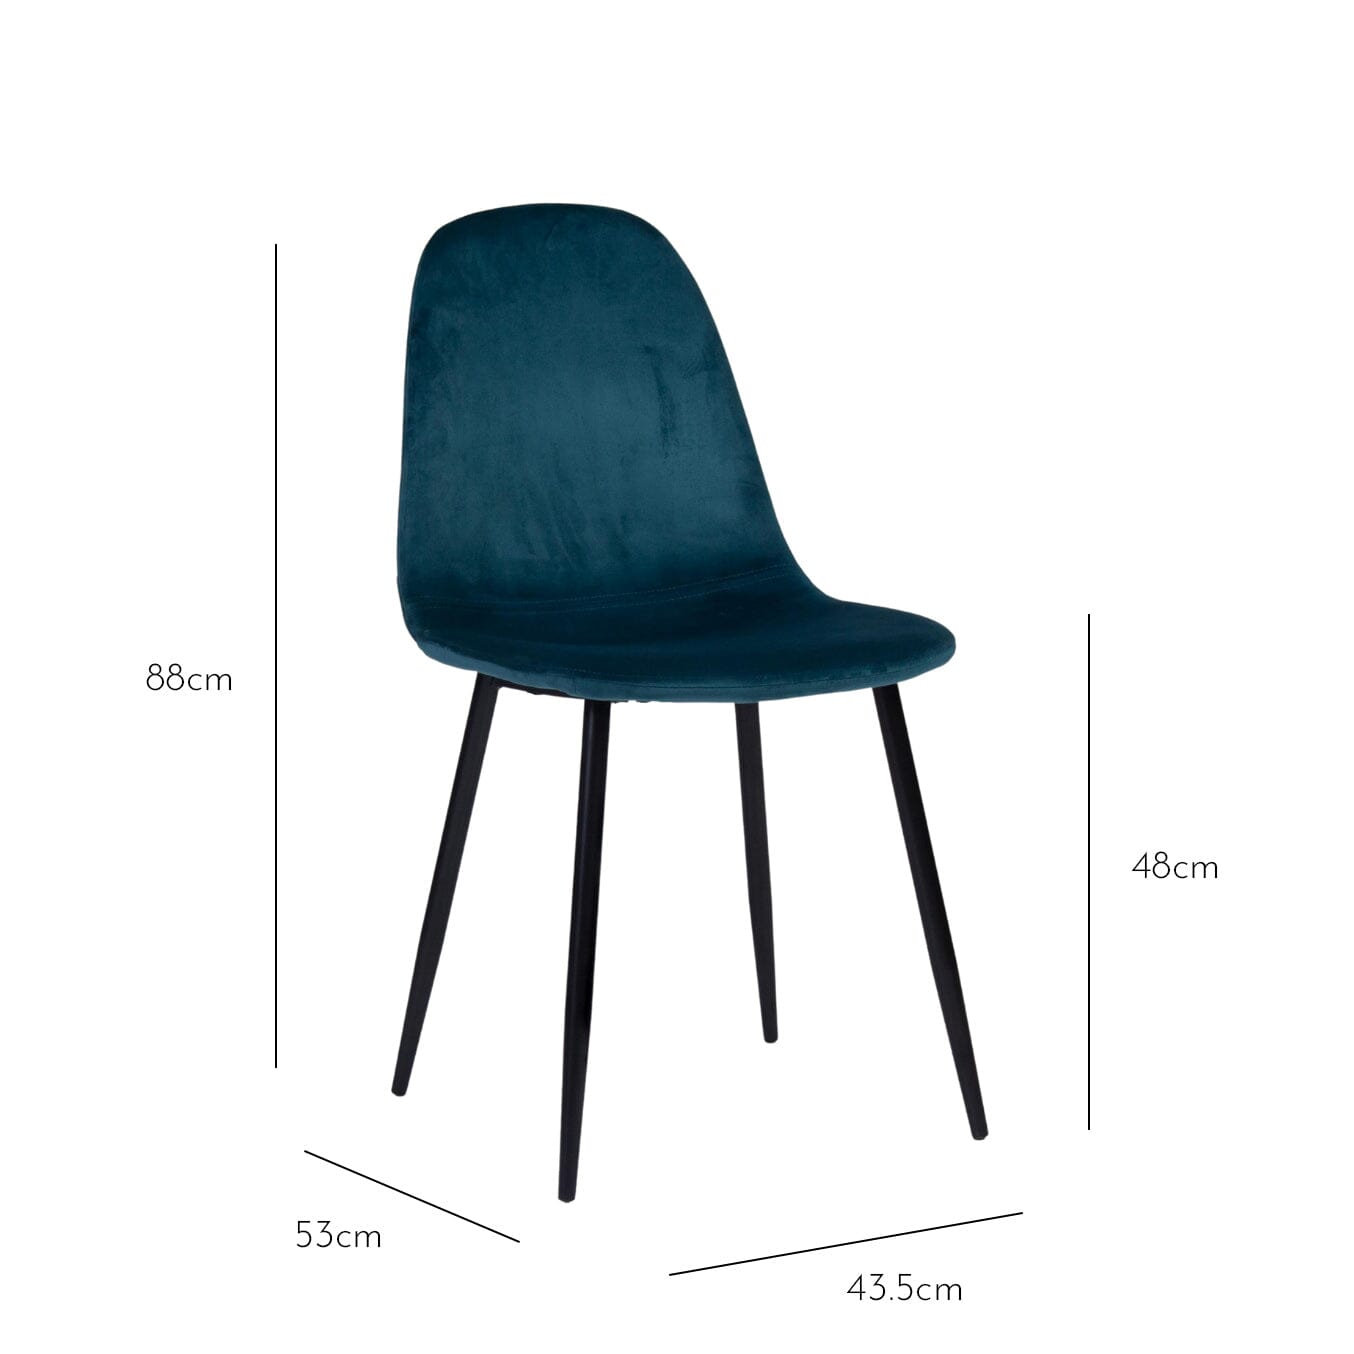 Teal Dining Room Chair